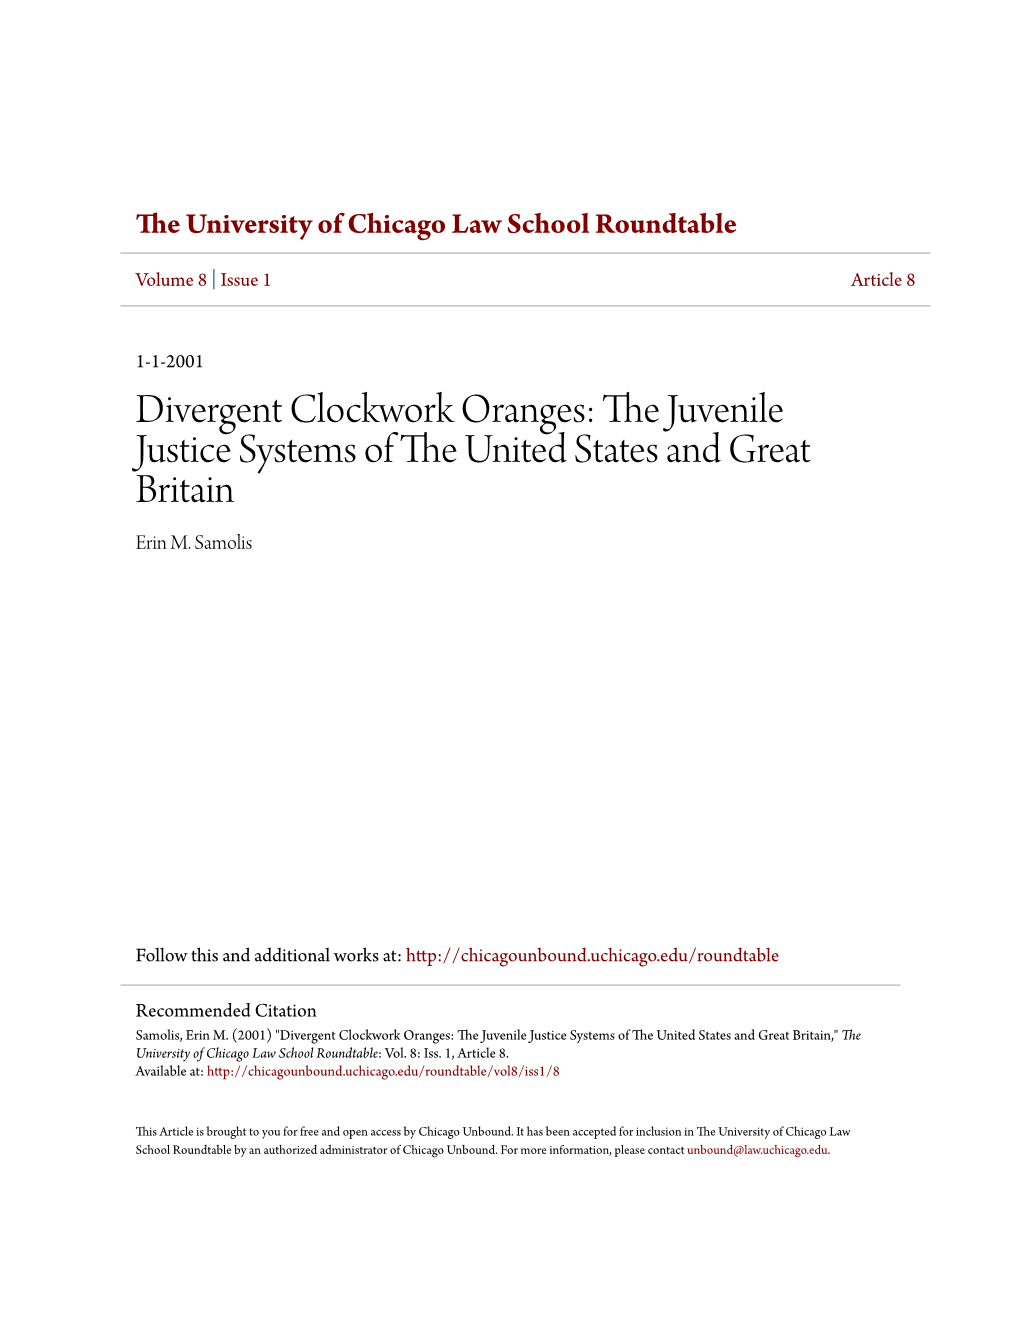 Divergent Clockwork Oranges: the Juvenile Justice Systems of the United States and Great Britain